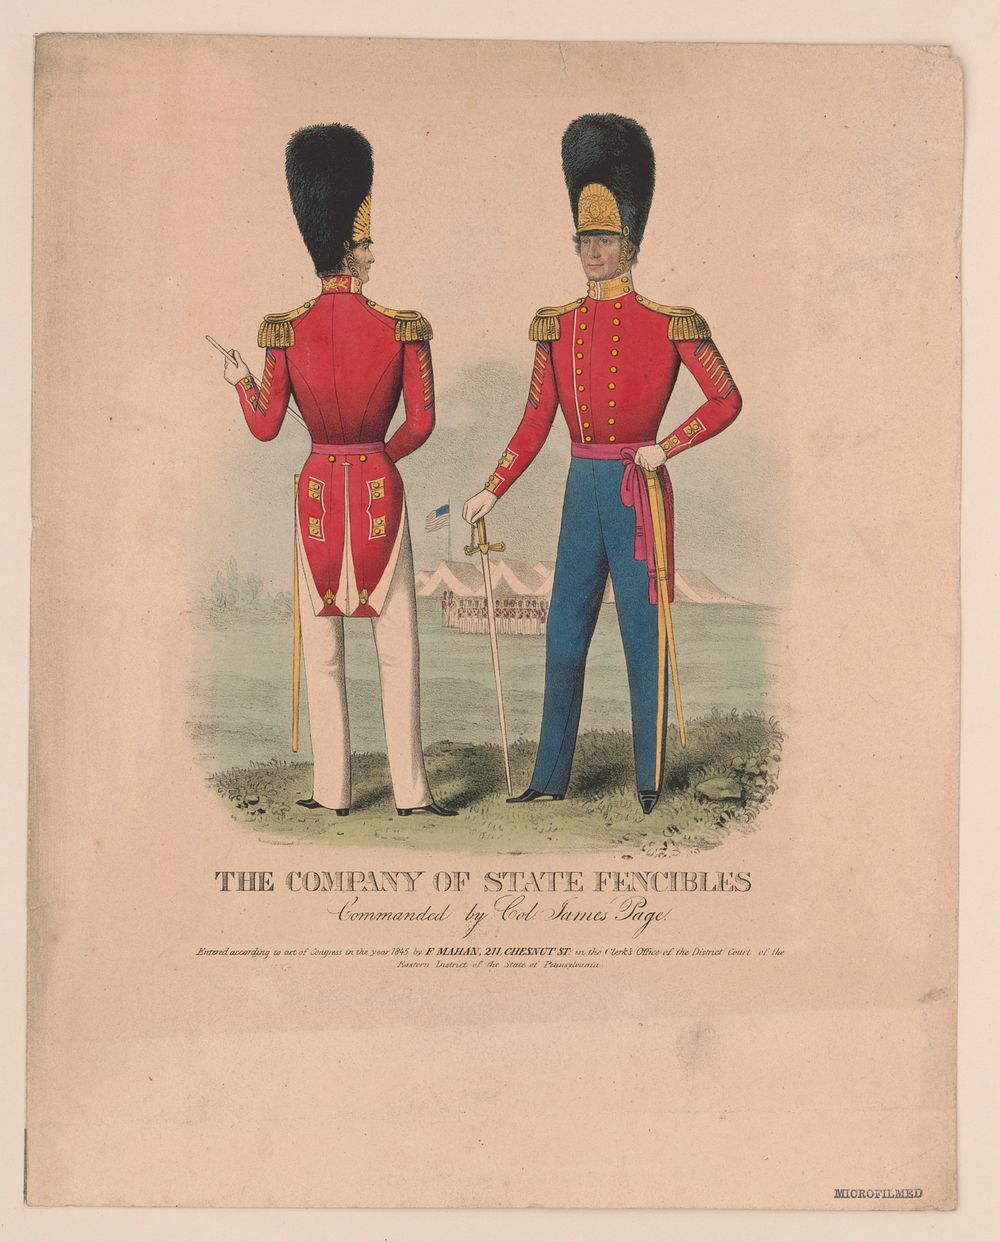 The company of state fencibiles, c1845 May 20.